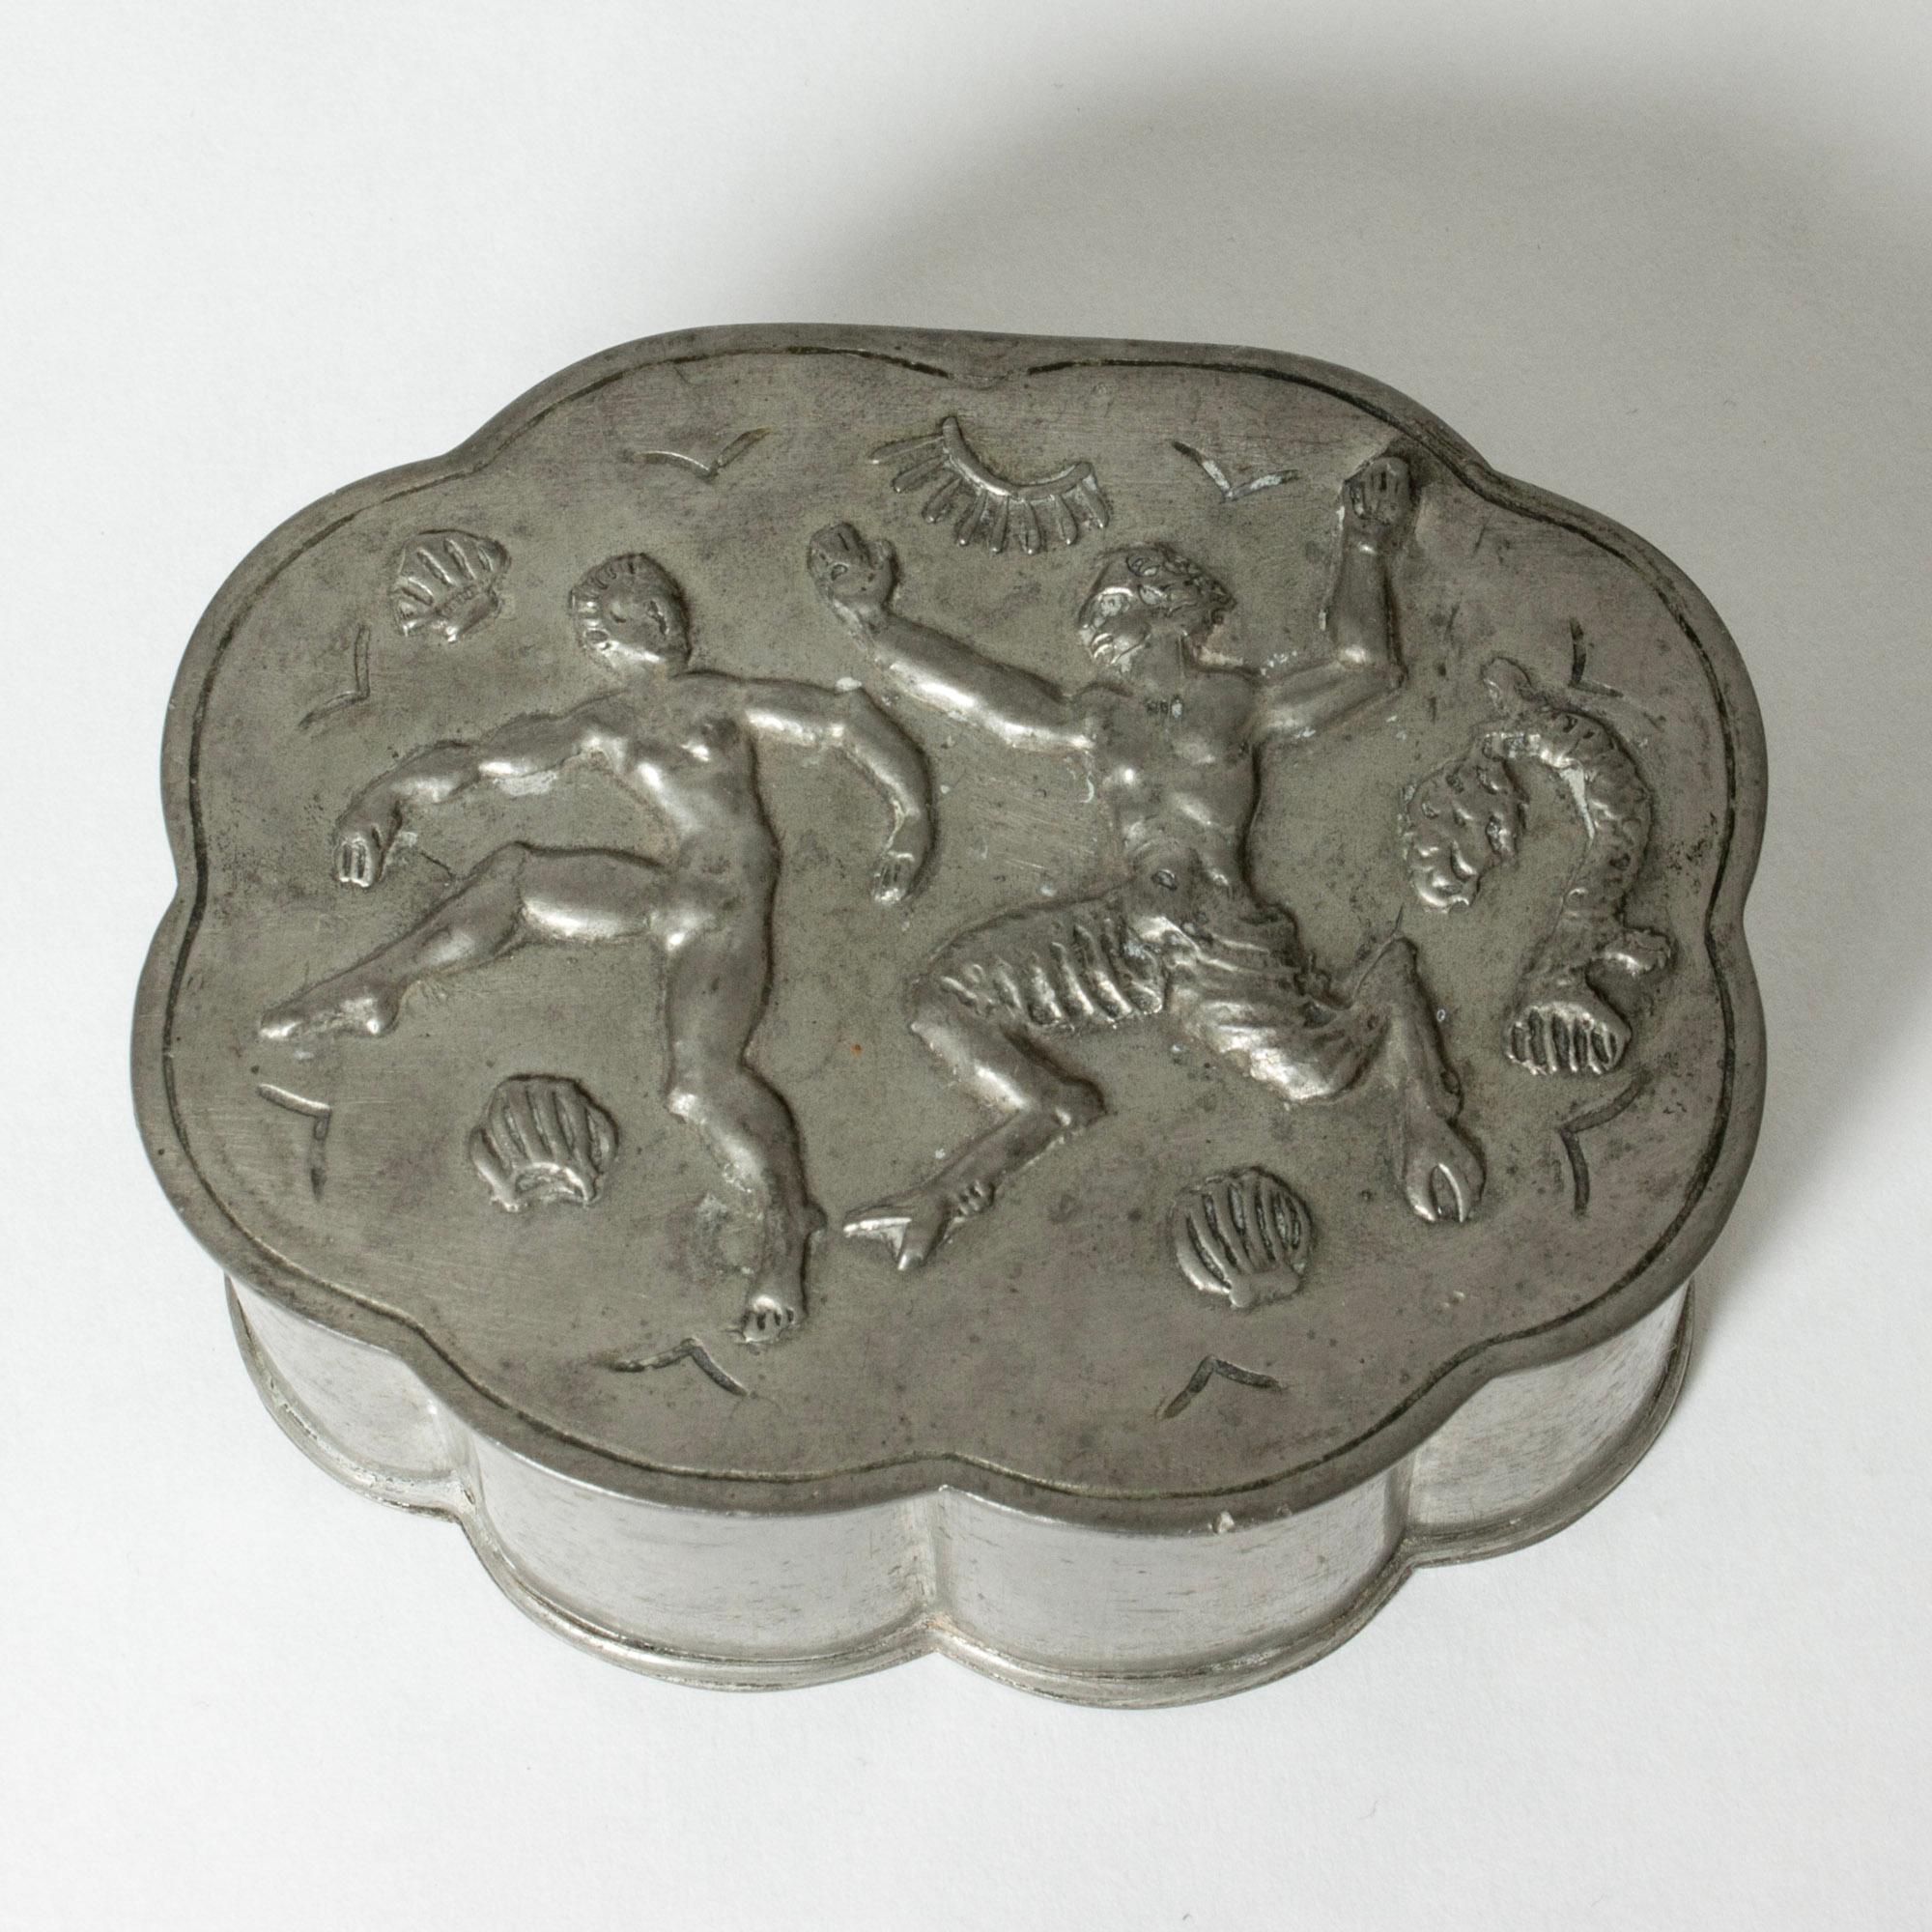 Lovely pewter box from Herman Bergman, in oval shape with a scalloped silhouette. Decor of a lively woman and a faun among shells and coral. Pretty etched pattern on the lid and around the base.